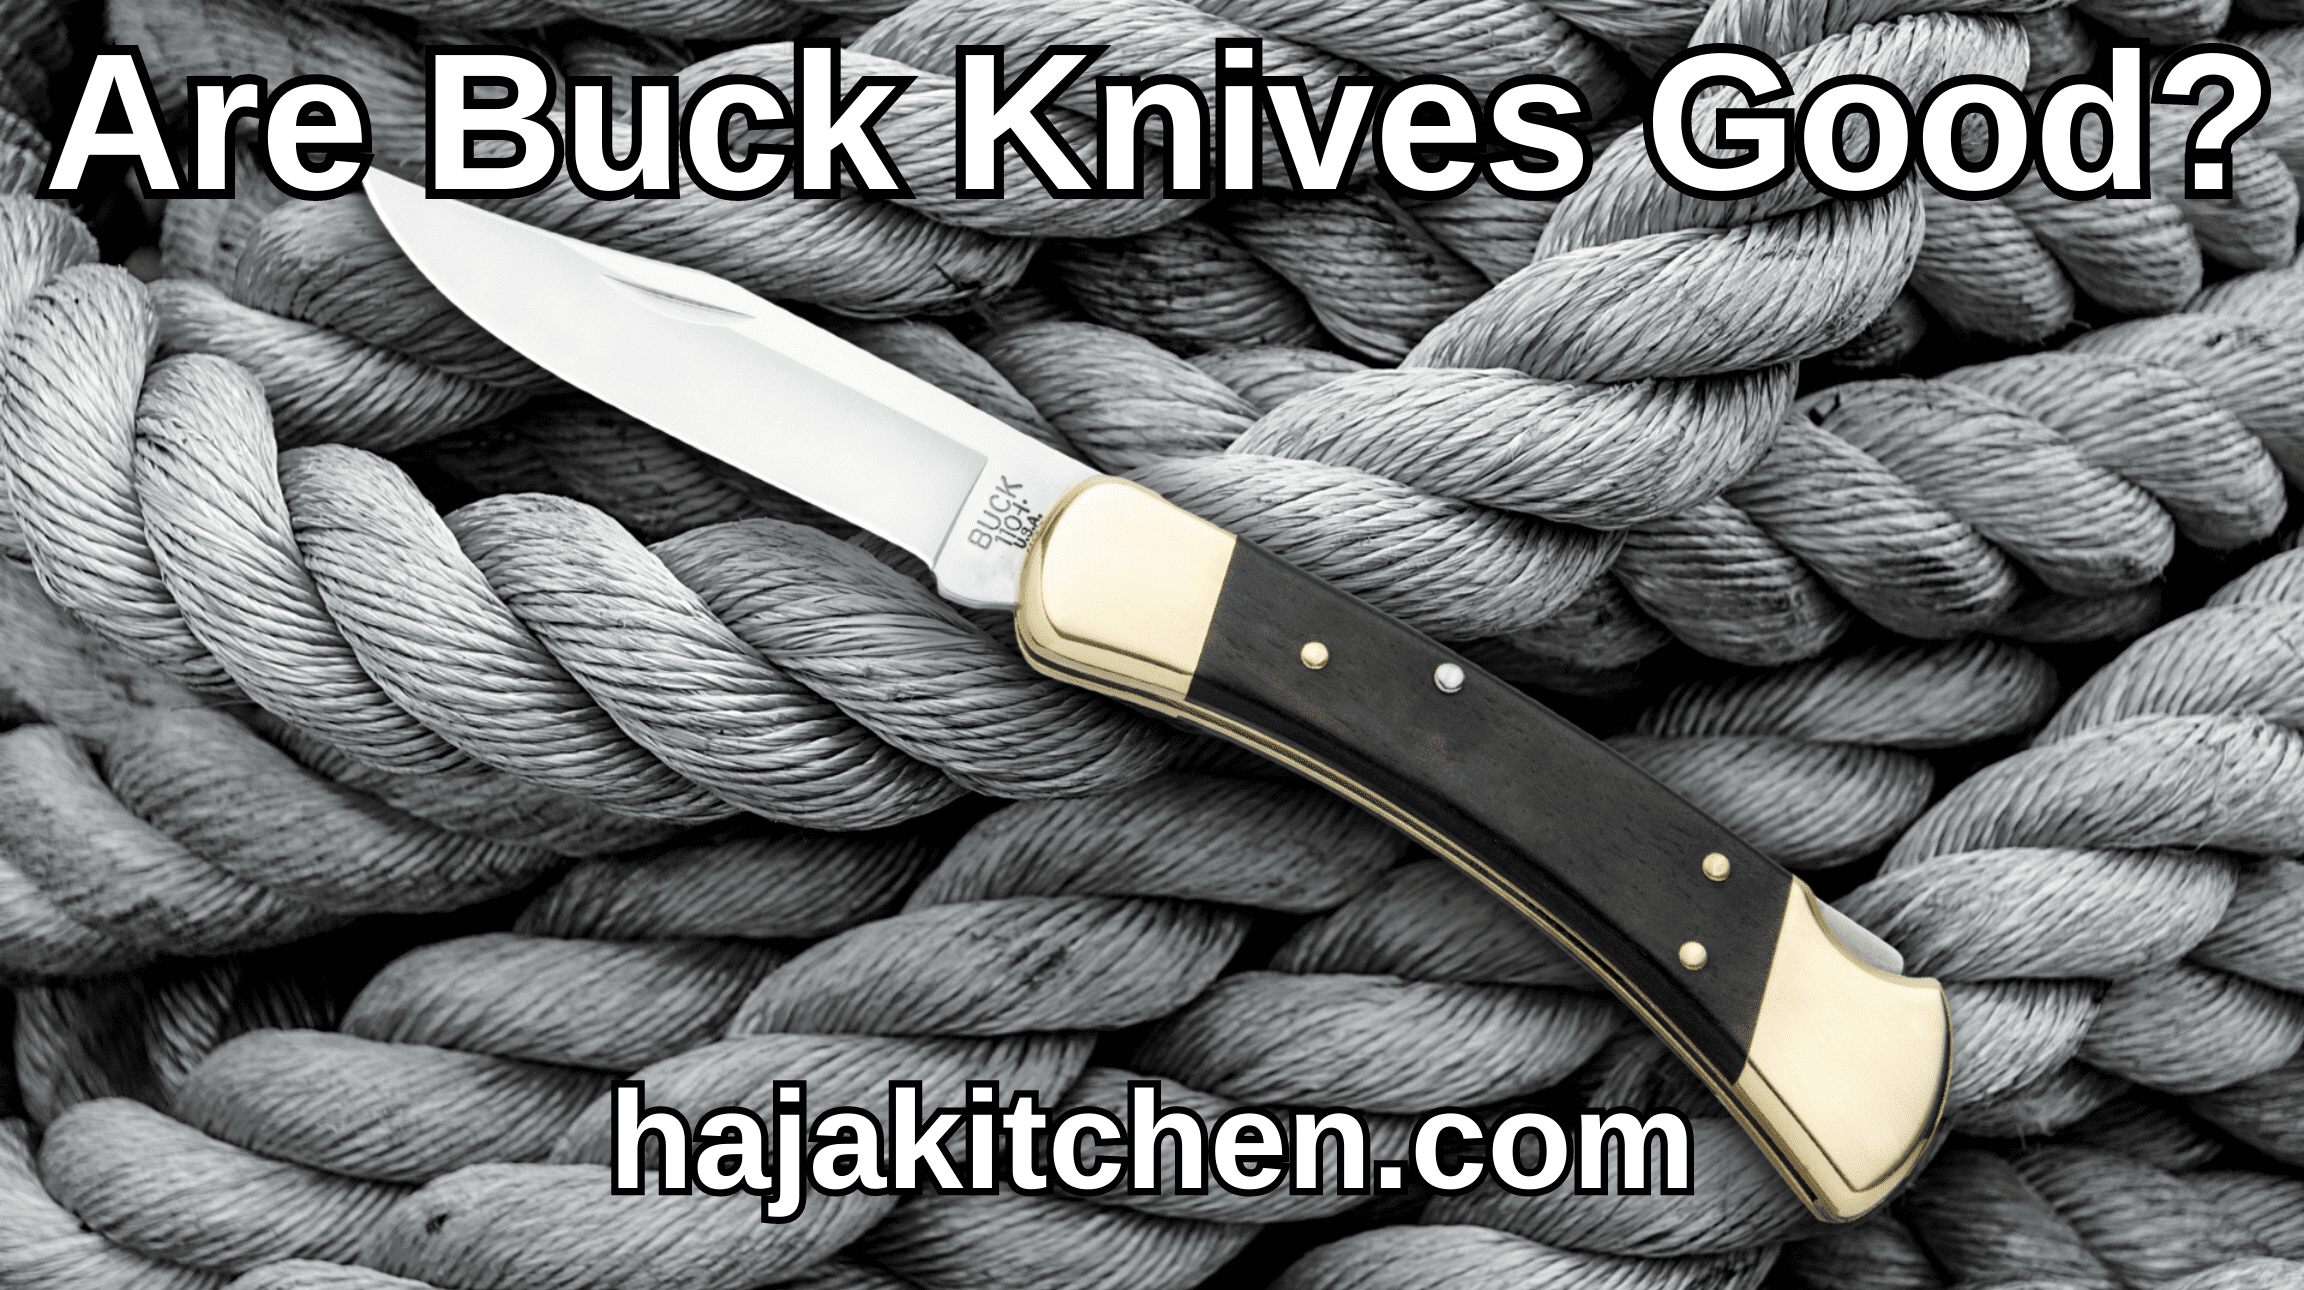 Are Buck Knives Good?